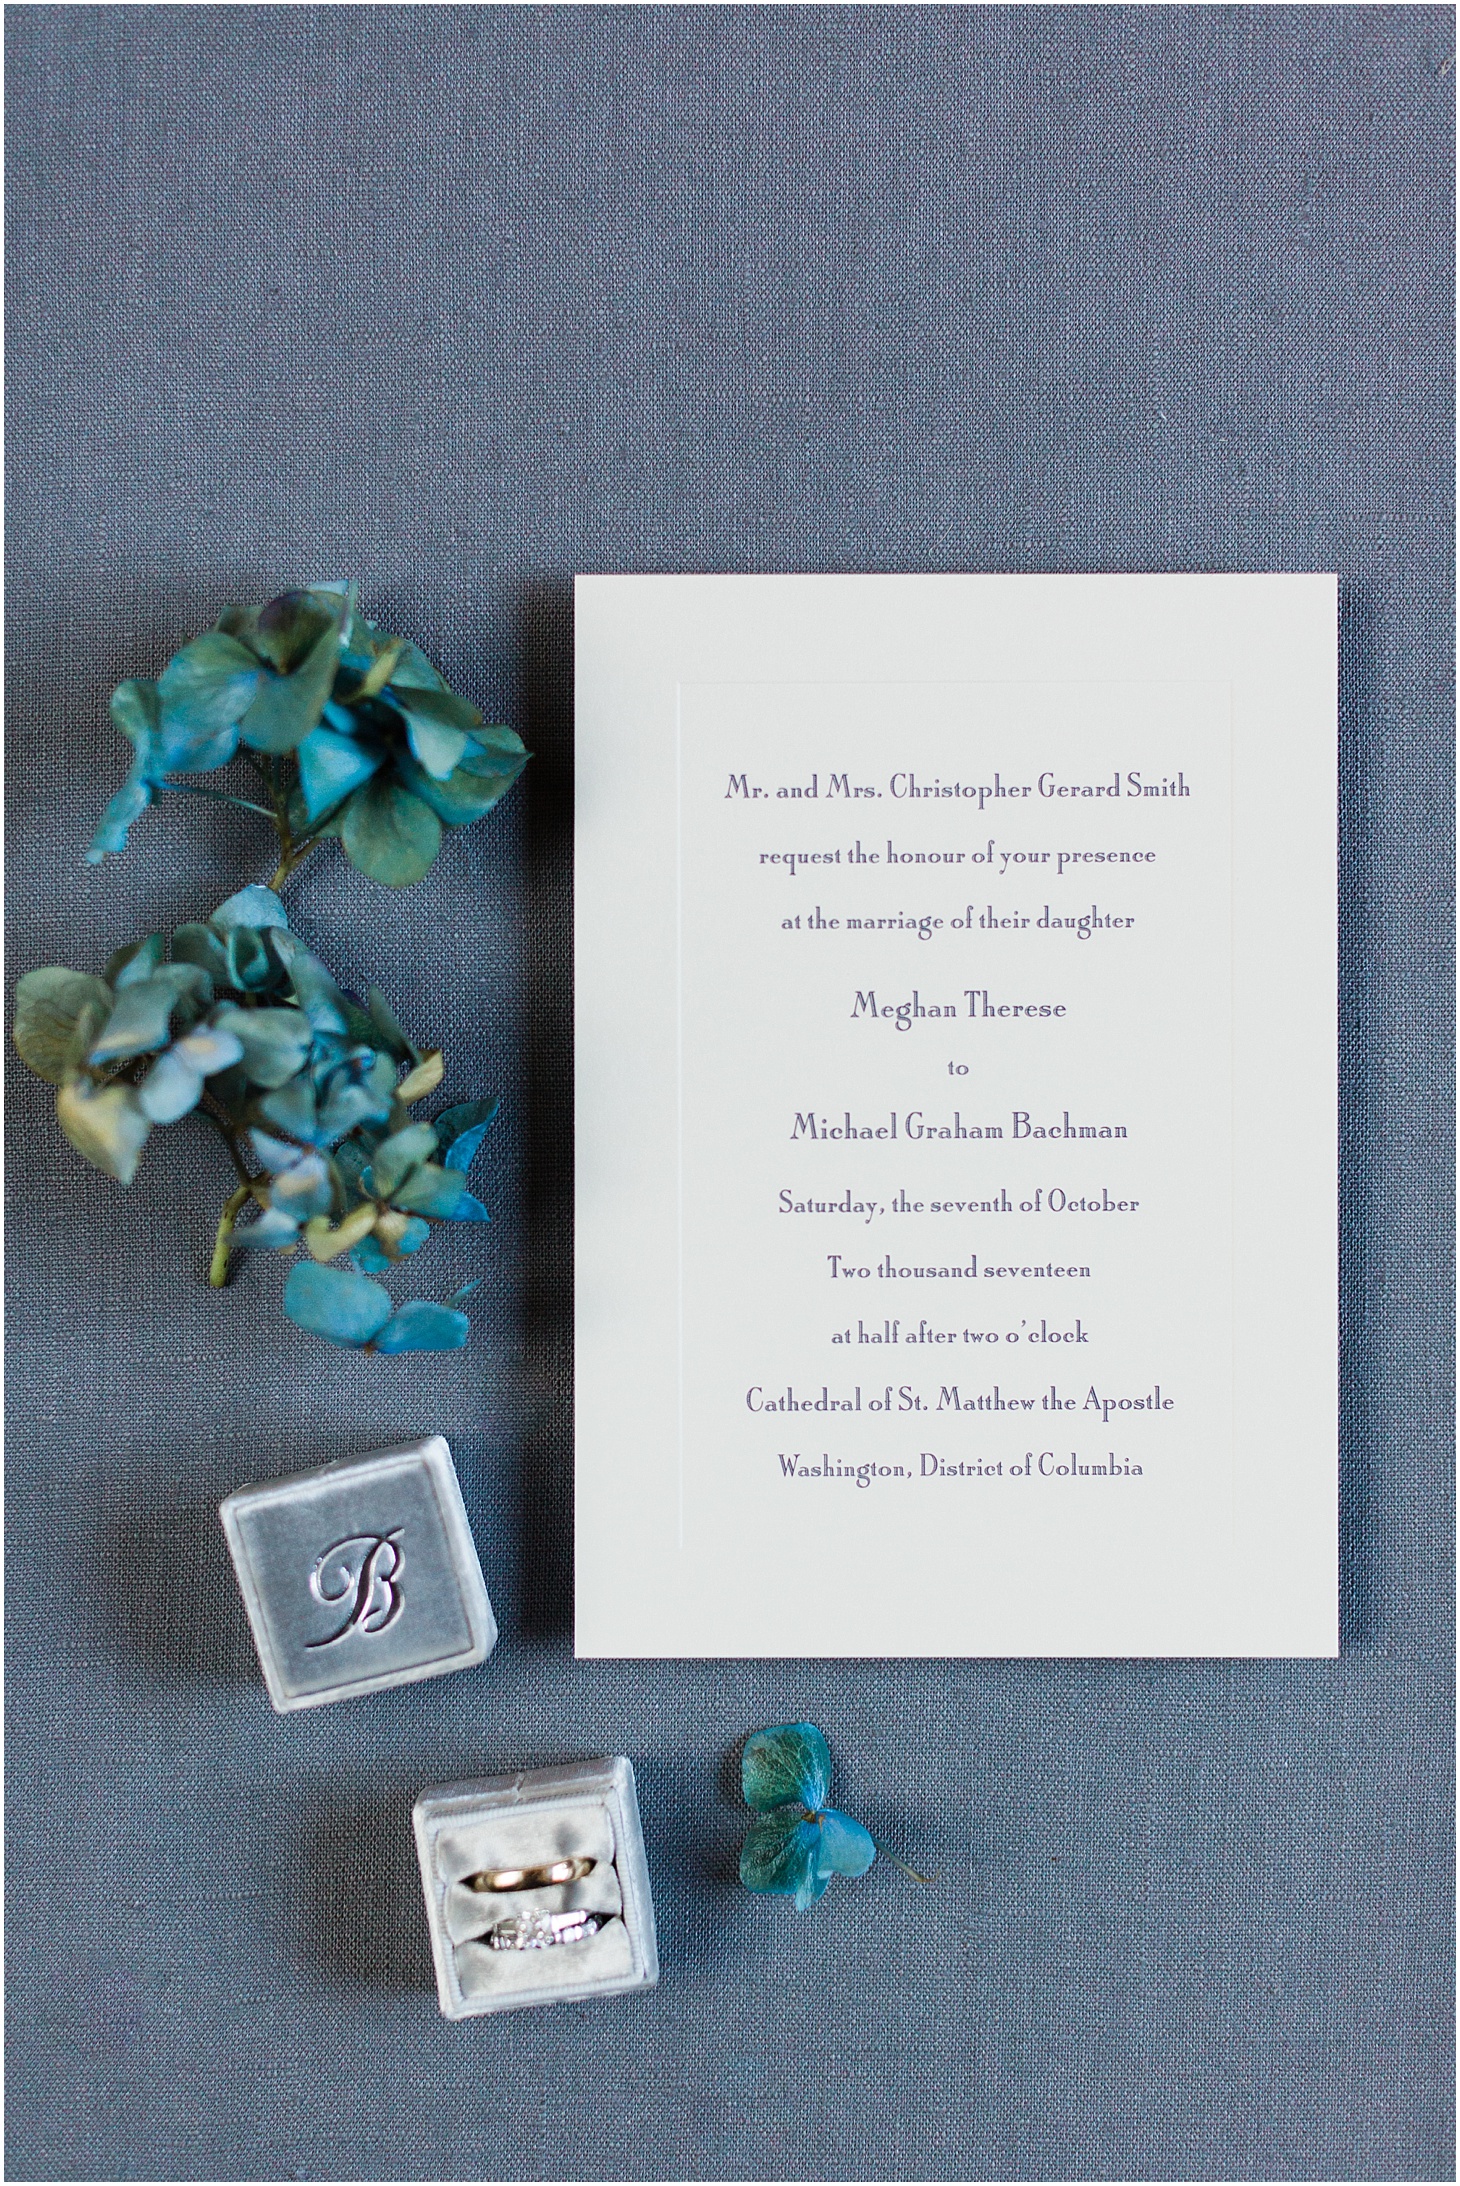 Wedding Invitation and Ring Details | Wedding Ceremony at Cathedral of St. Matthew the Apostle | Classy October Wedding at Columbia Country Club | Sarah Bradshaw Photography